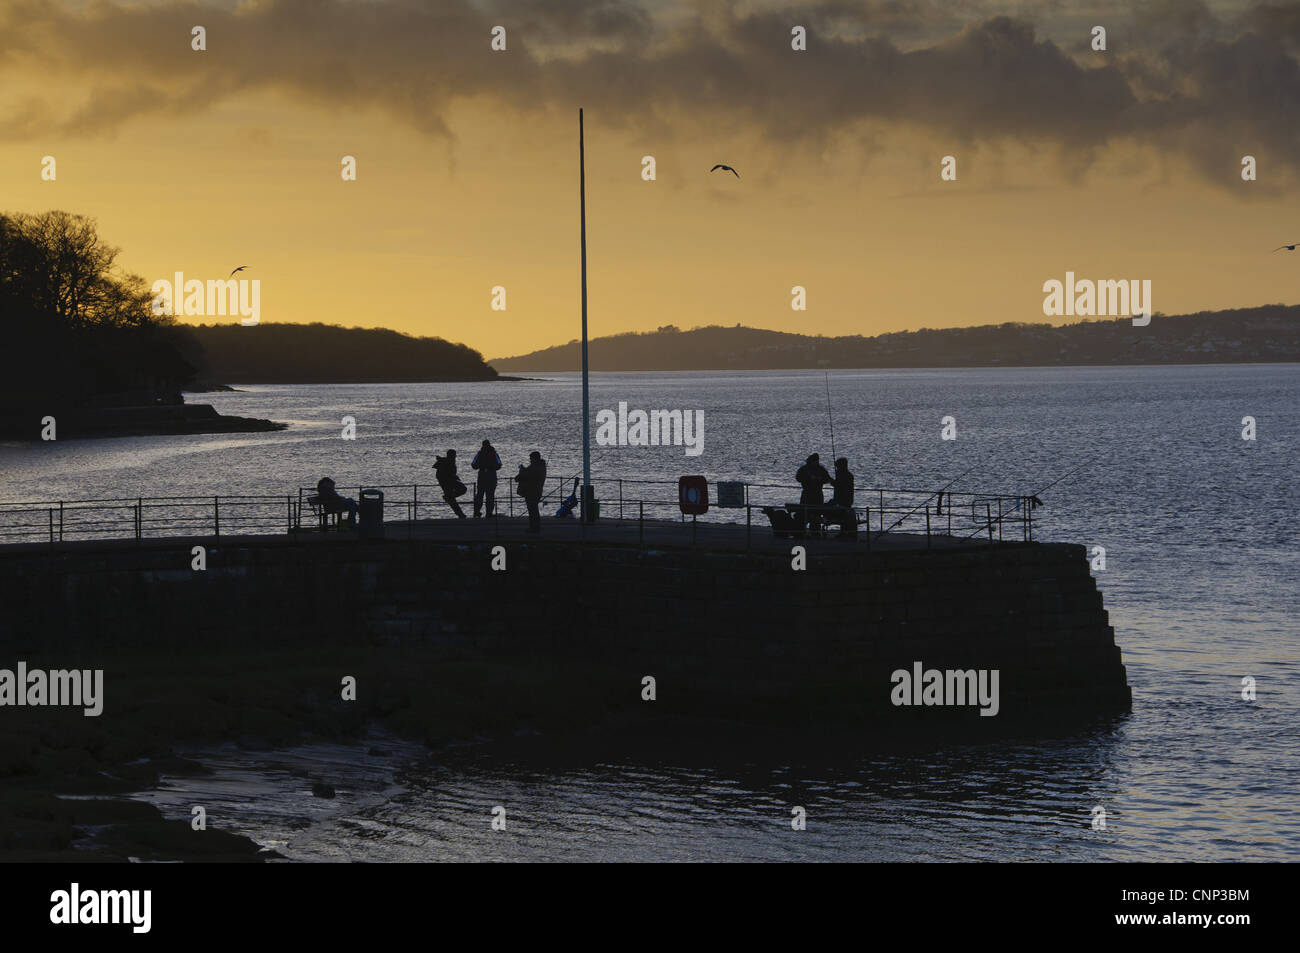 Anglers on pier silhouetted at sunset, River Kent, Arnside, Morecambe Bay, Cumbria, England, january Stock Photo